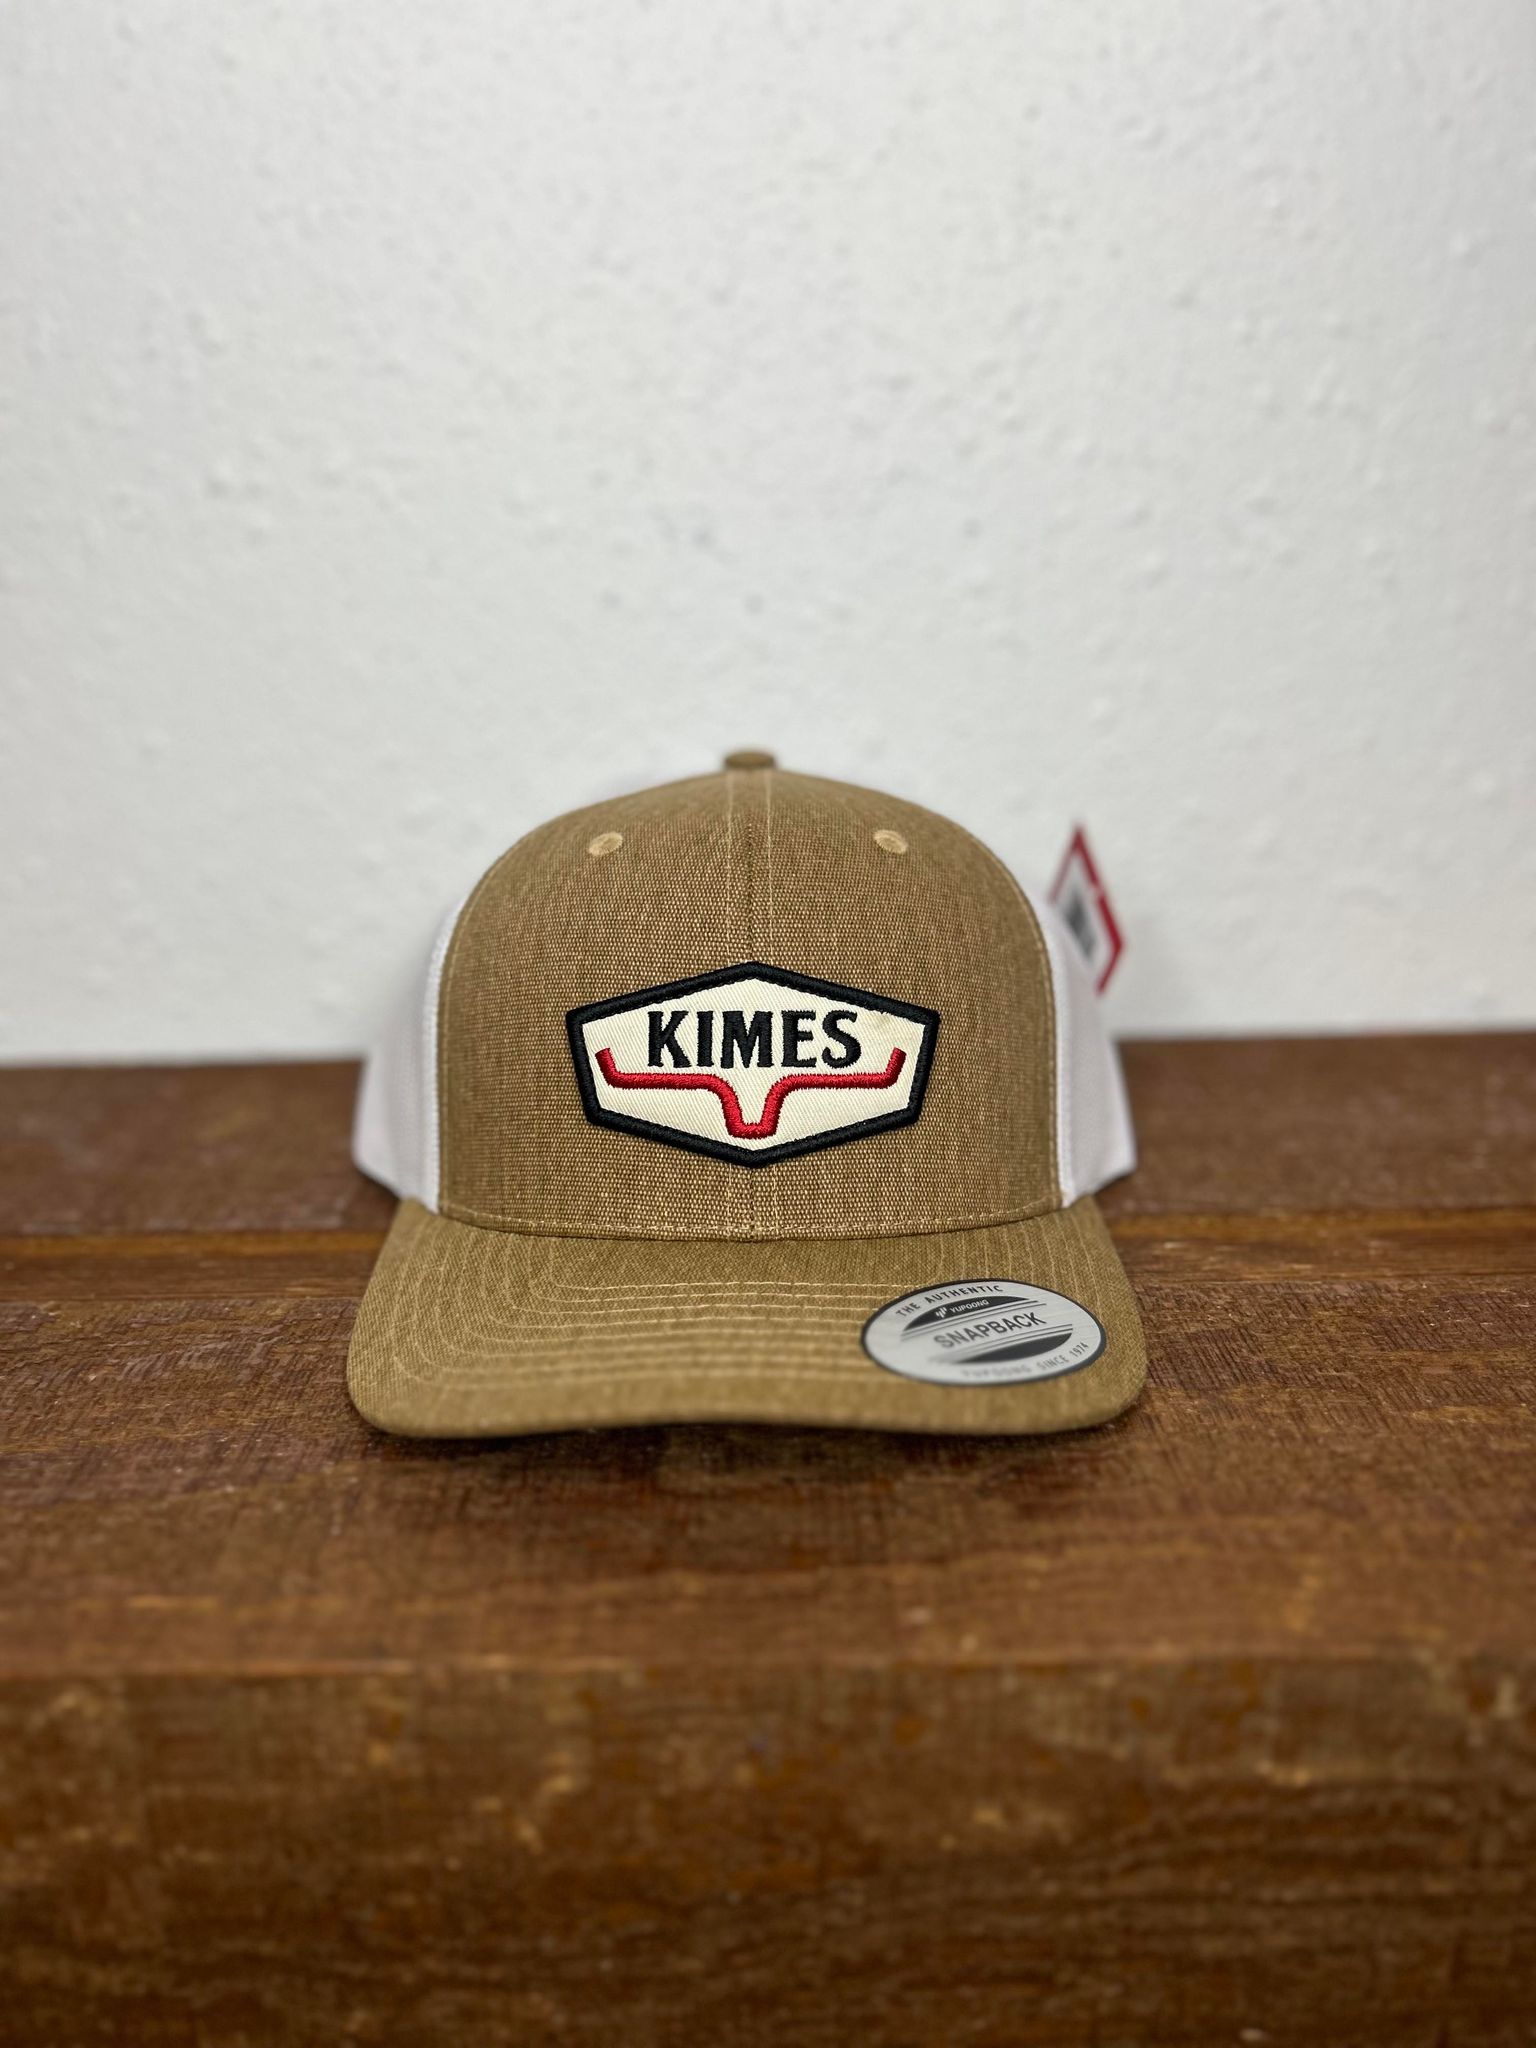 Kimes Caps-Caps-Kimes Ranch-Lucky J Boots & More, Women's, Men's, & Kids Western Store Located in Carthage, MO